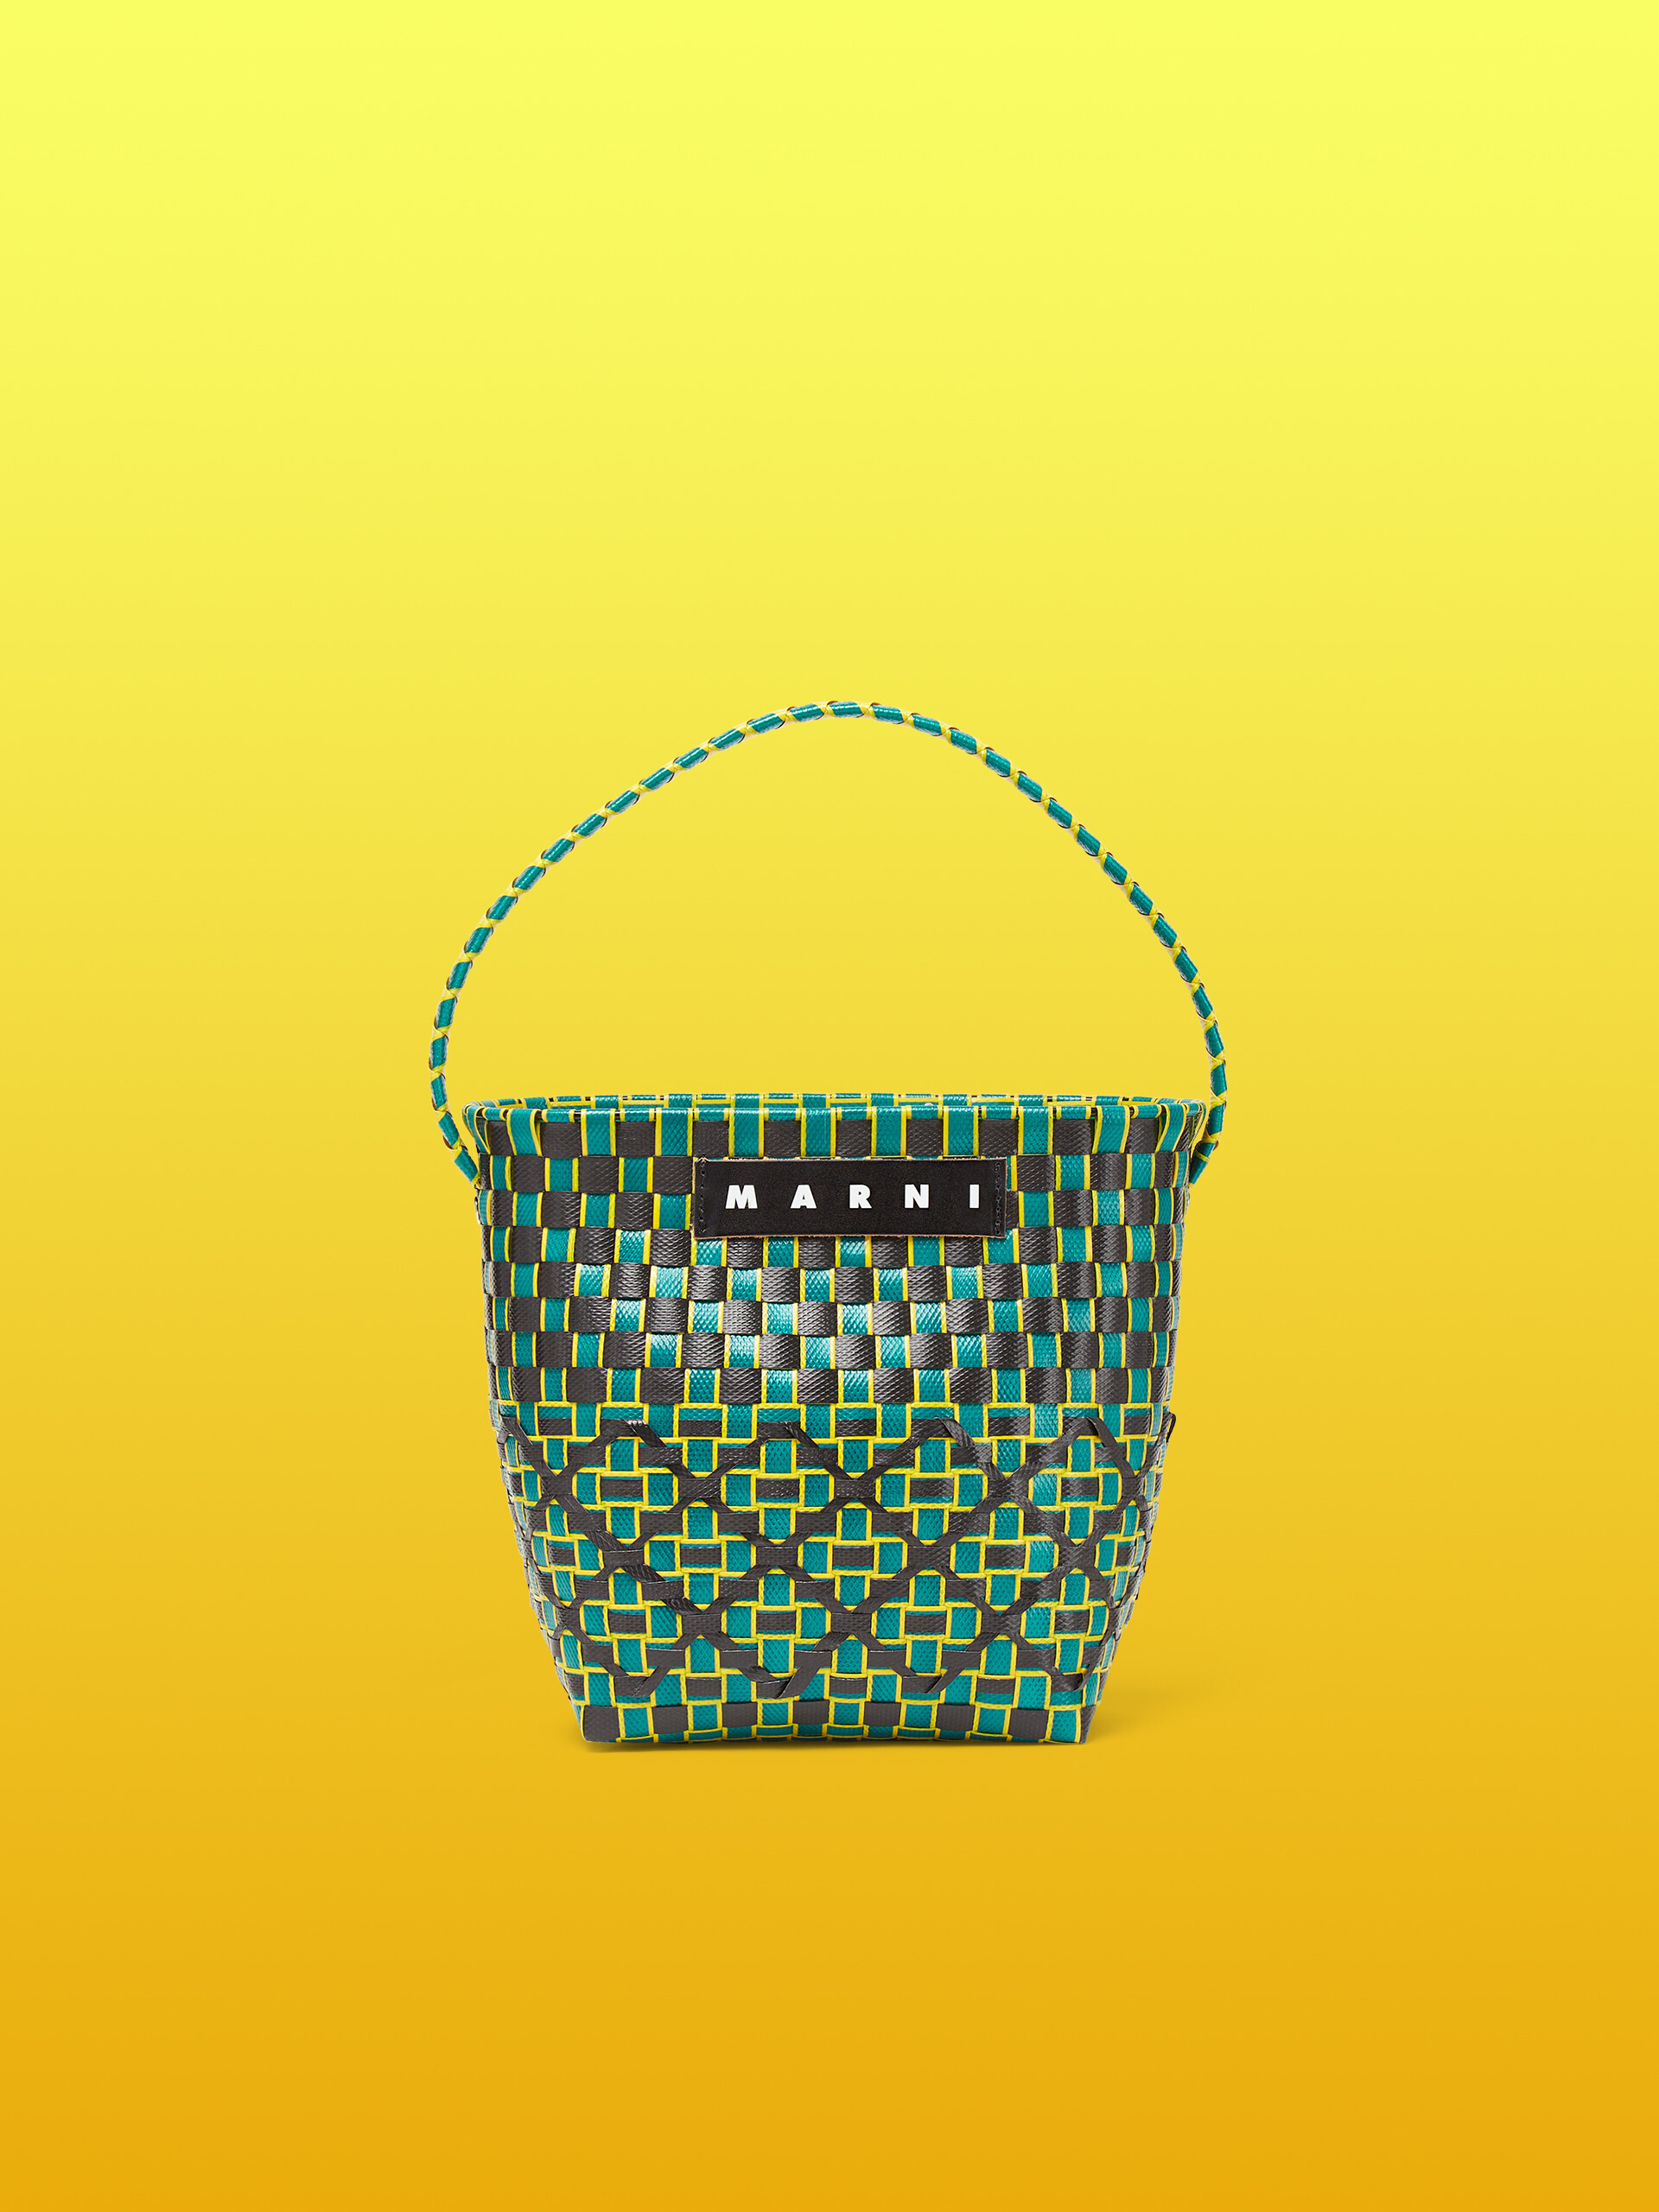 MARNI MARKET OVAL BASKET bag in orange and black woven material - Shopping Bags - Image 1